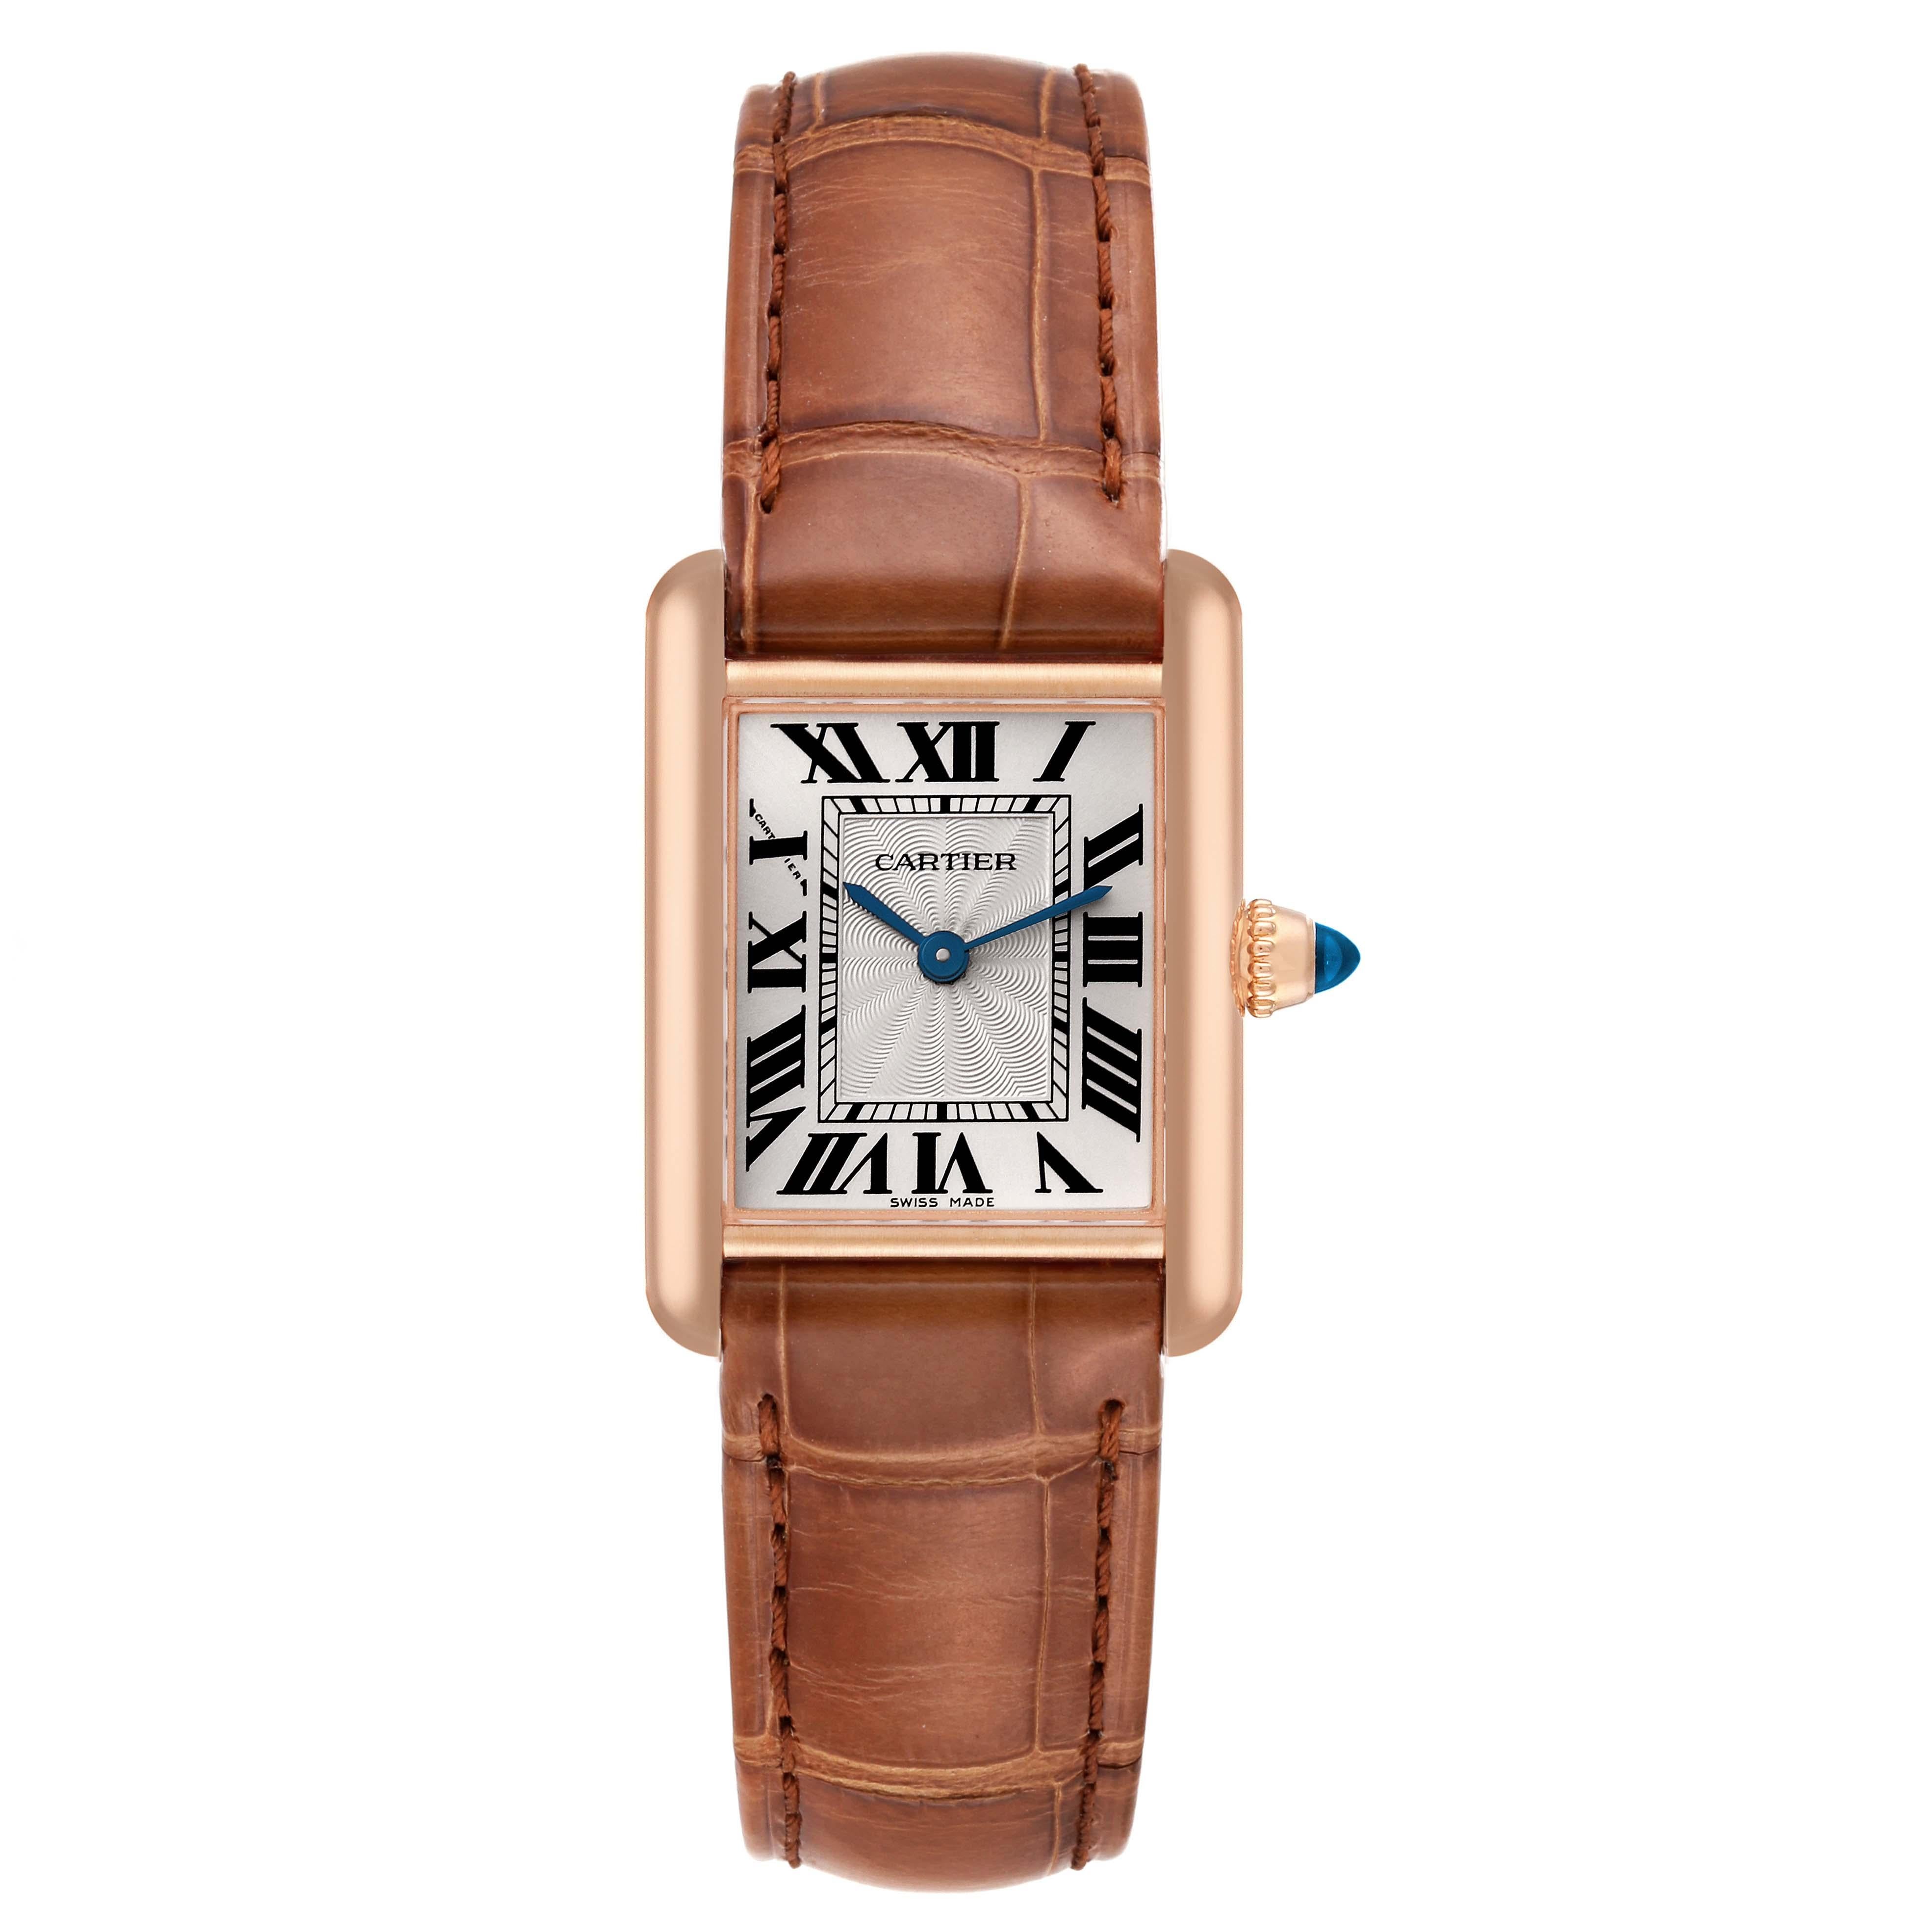 Cartier Tank Louis Rose Gold Mechanical Ladies Watch WGTA0010 Papers. Manual winding movement. 18k rose gold case 29.5 x 22.0 mm. Circular grained crown set with the blue sapphire cabochon. . Mineral crystal. Silvered guilloche dial with black Roman